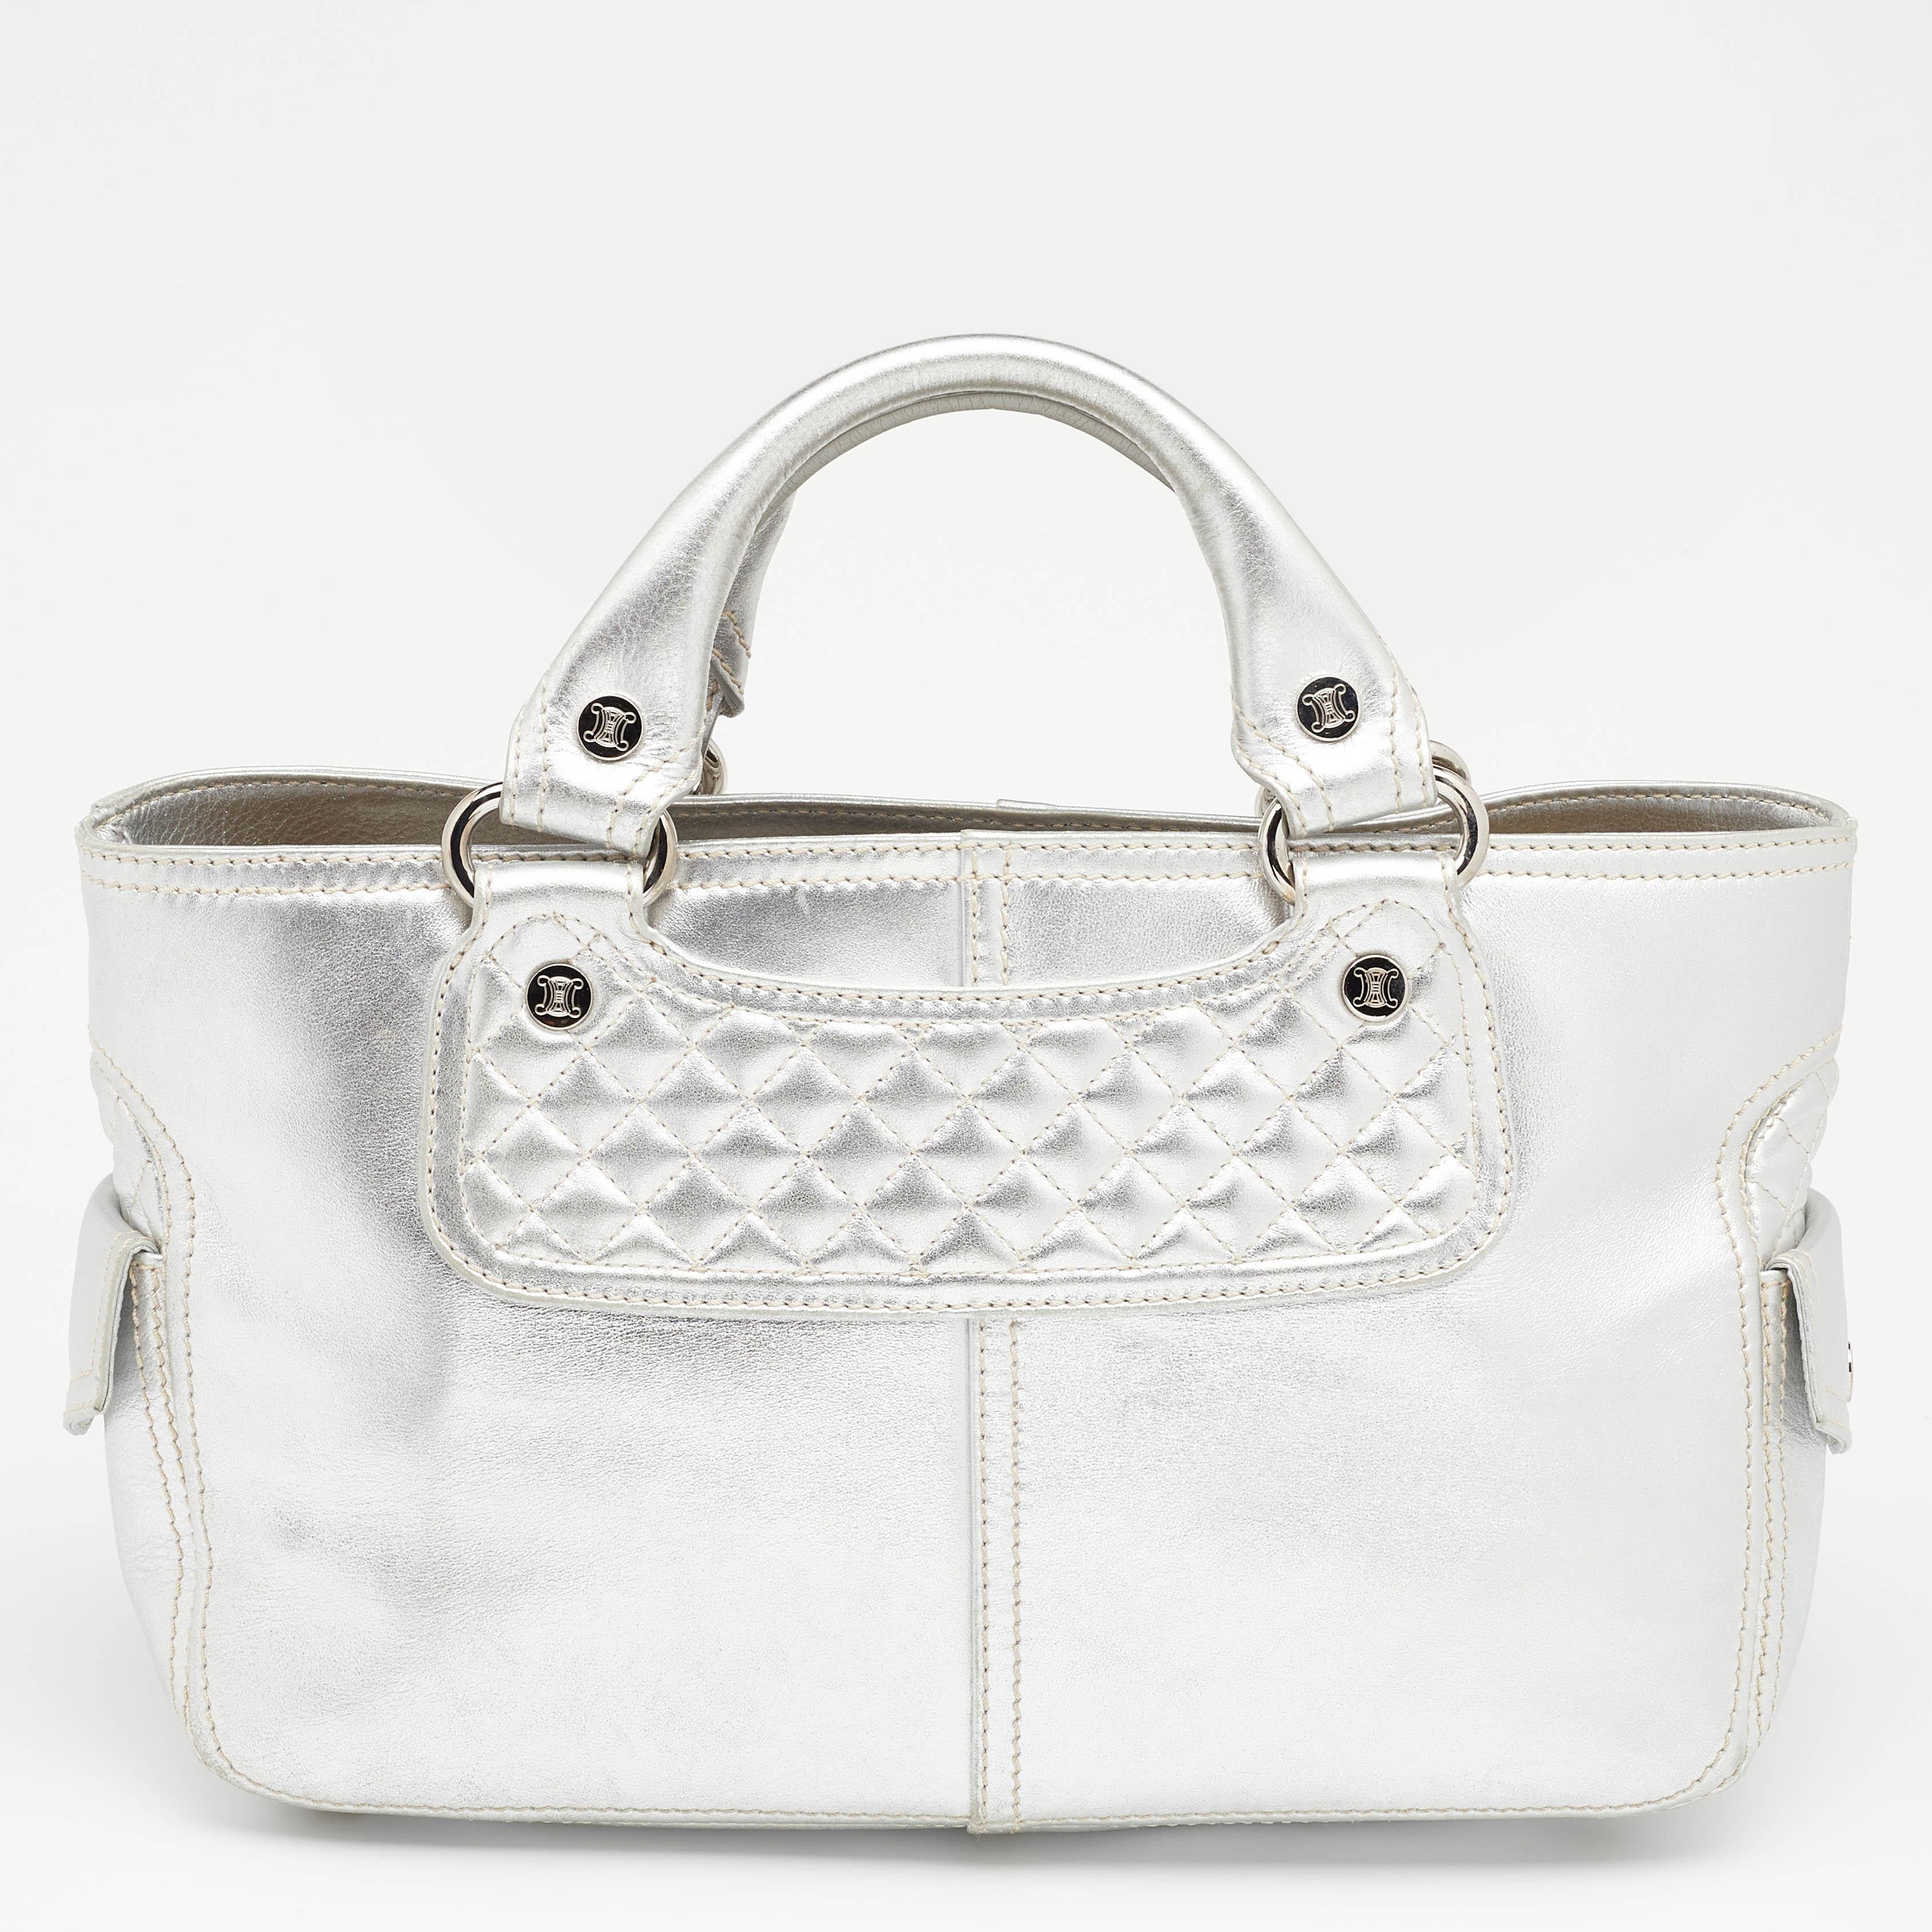 Ideal for everyday use, this Boogie tote is a much-loved Celine design. It is crafted from leather and equipped with a spacious suede interior. The metallic silver bag is complete with two short handles.

